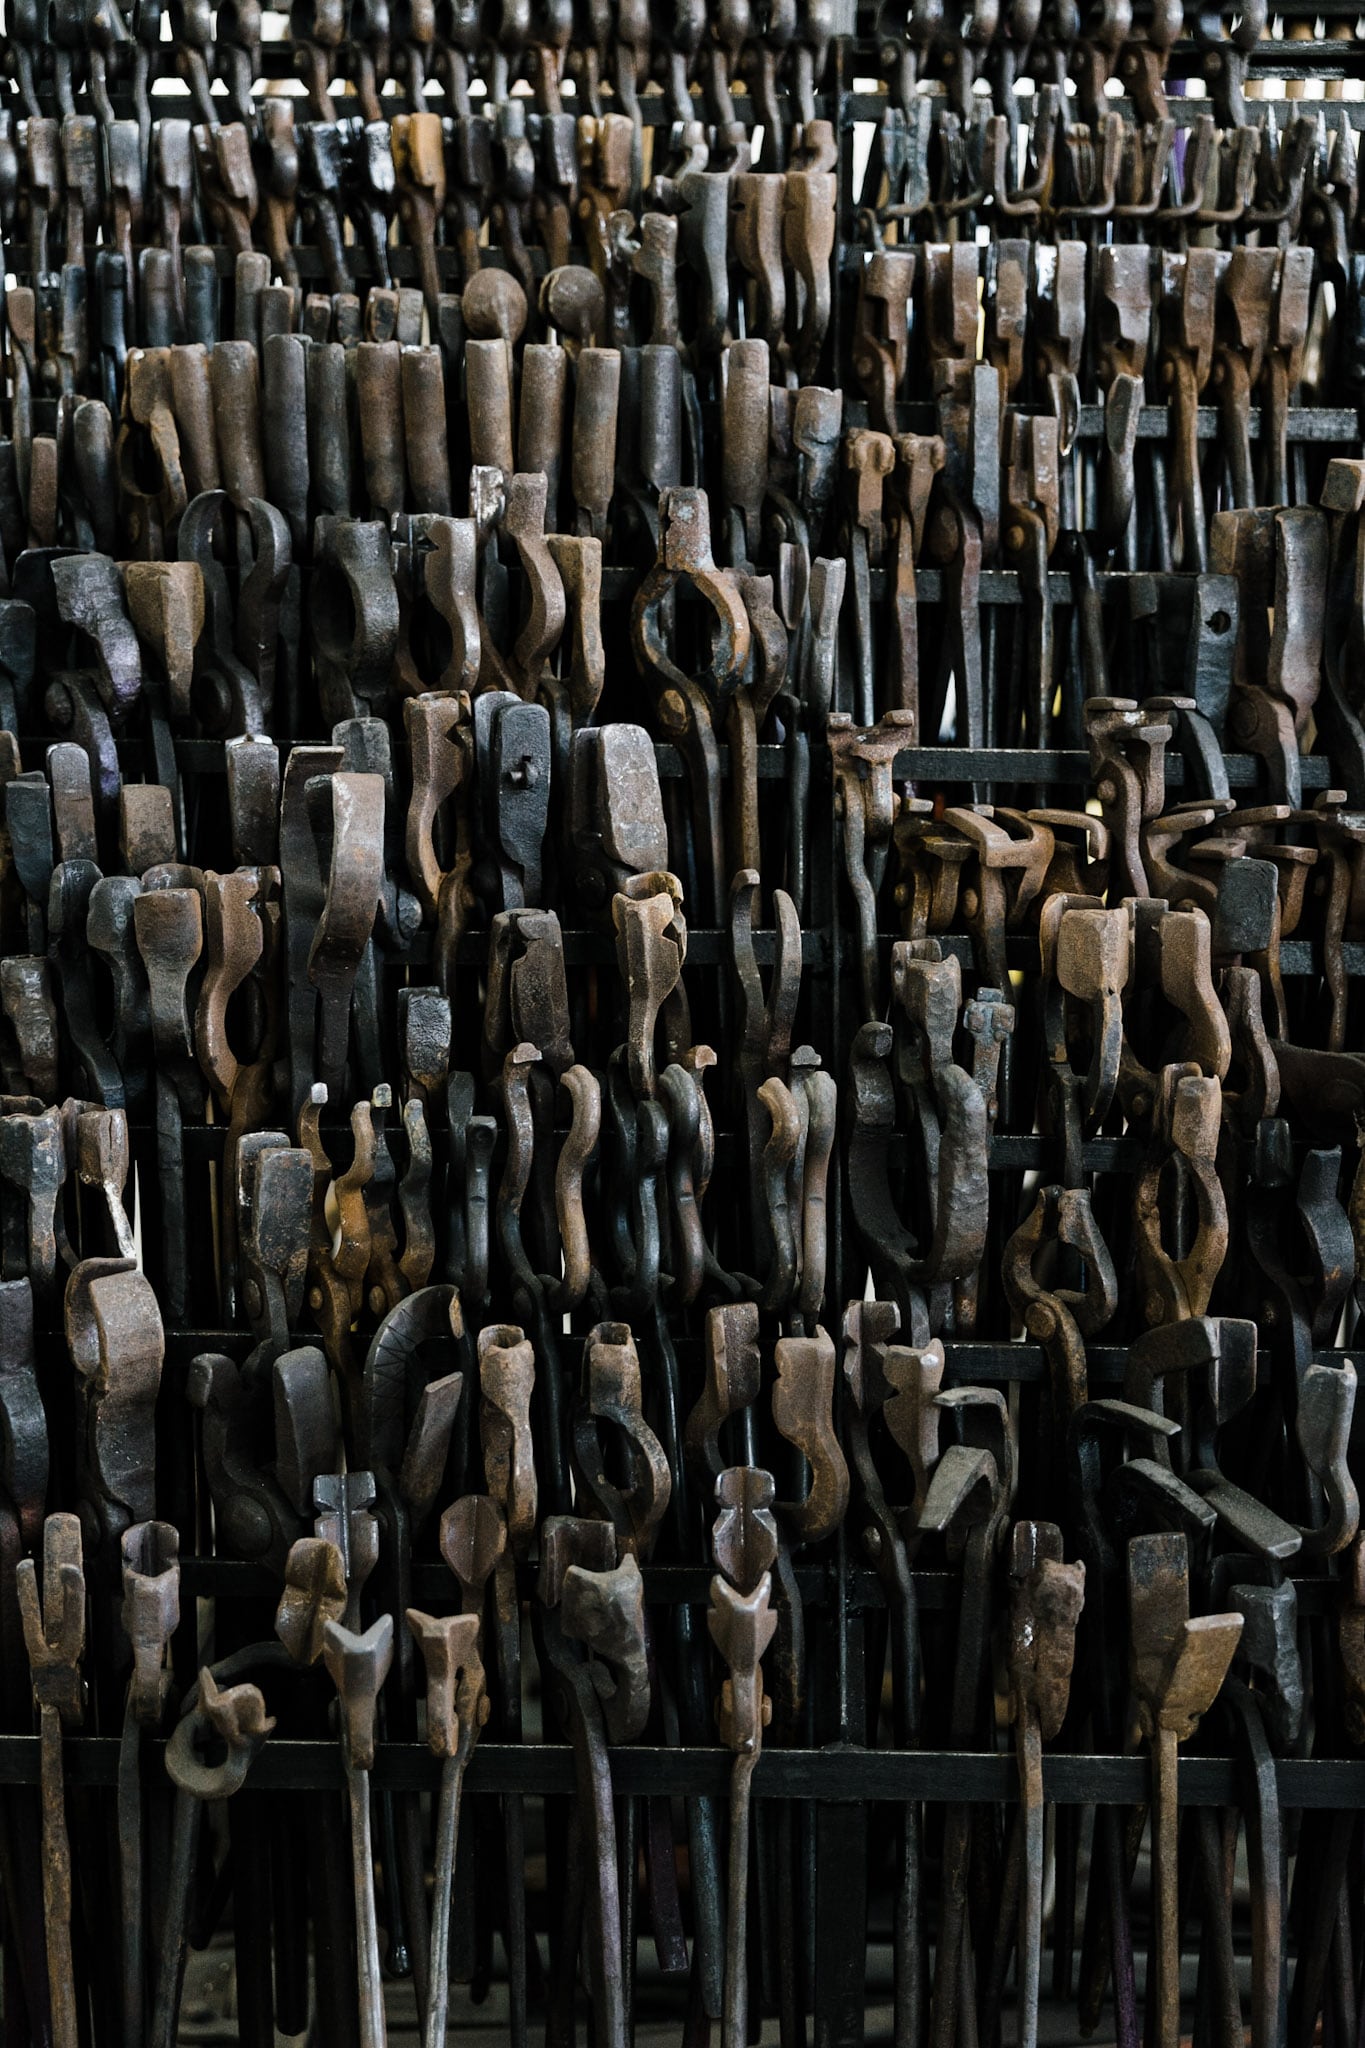 Blacksmithing tools lined up on racks at Adam's Forge in Los Angeles, CA